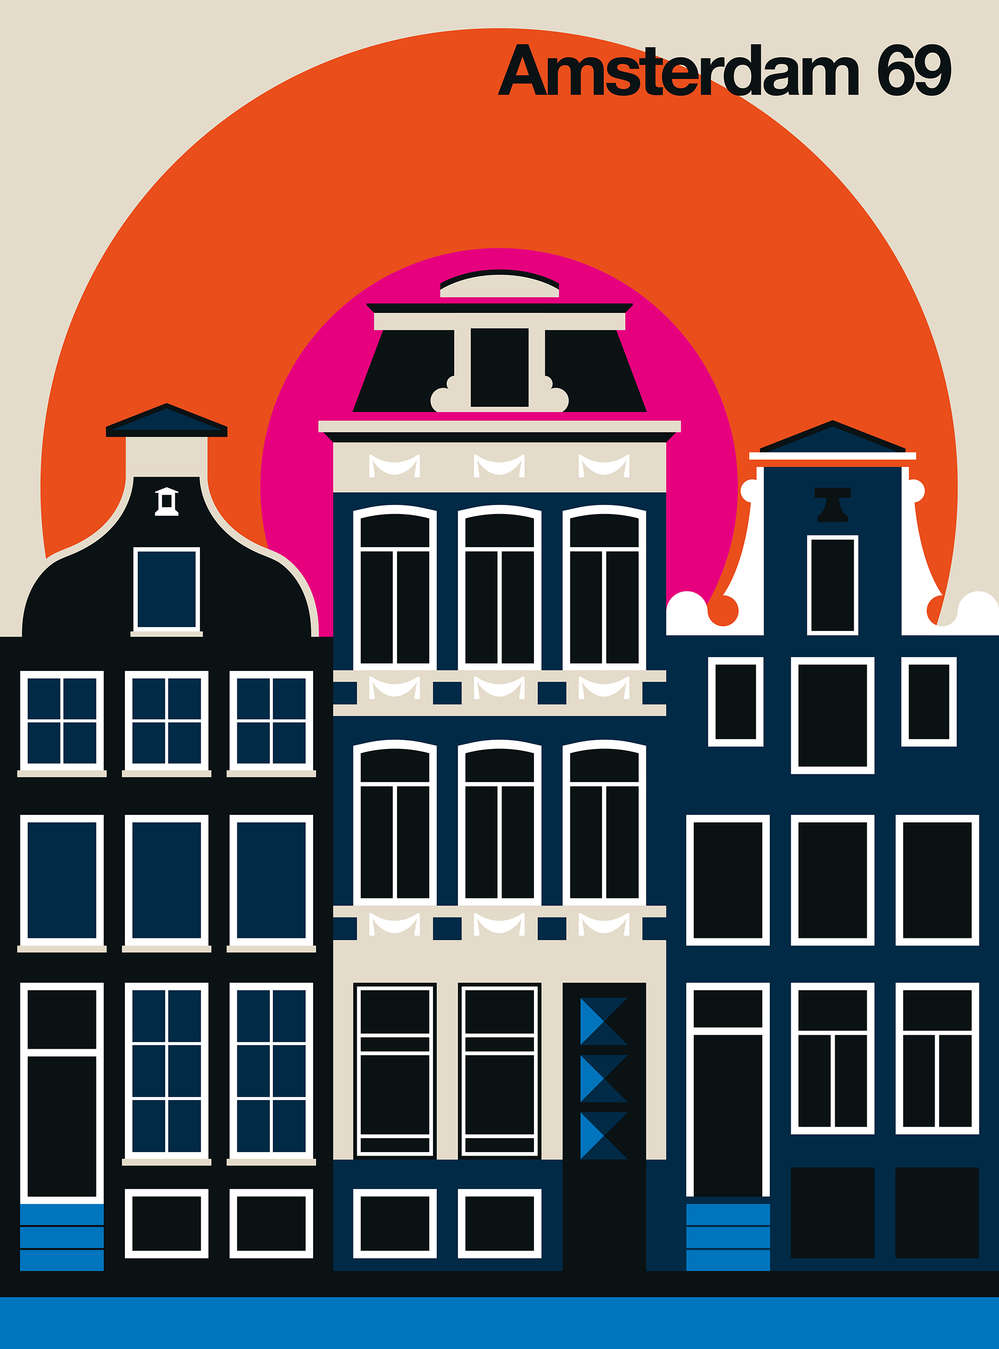             Photo wallpaper Amsterdam houses fronts in retro design
        